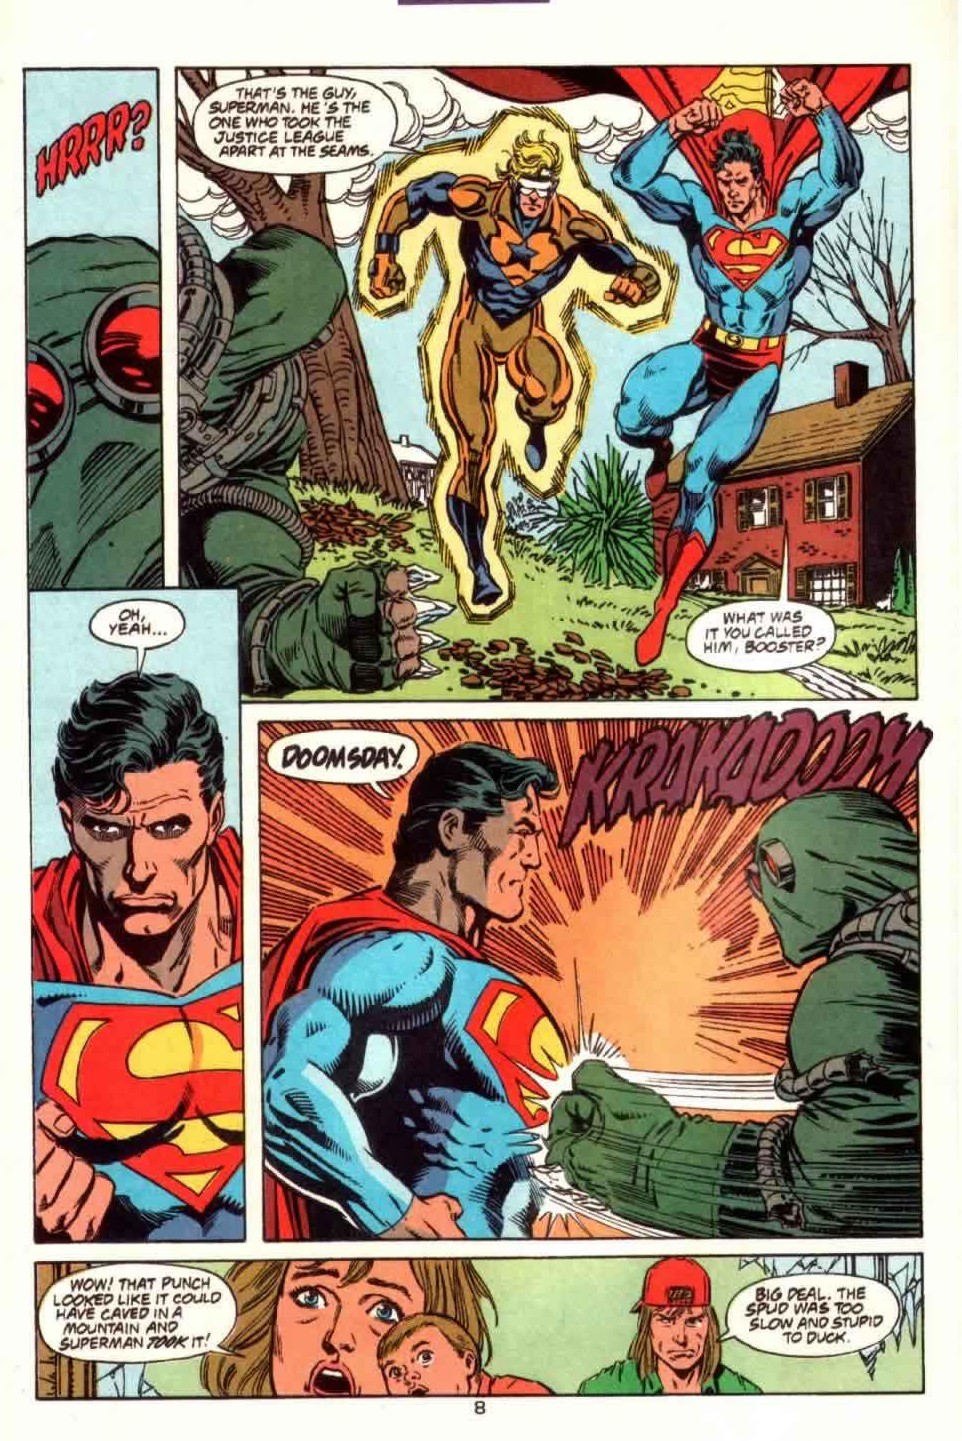 the-death-and-return-of-superman-1992-1993-page-64-e1400650388739.jpg